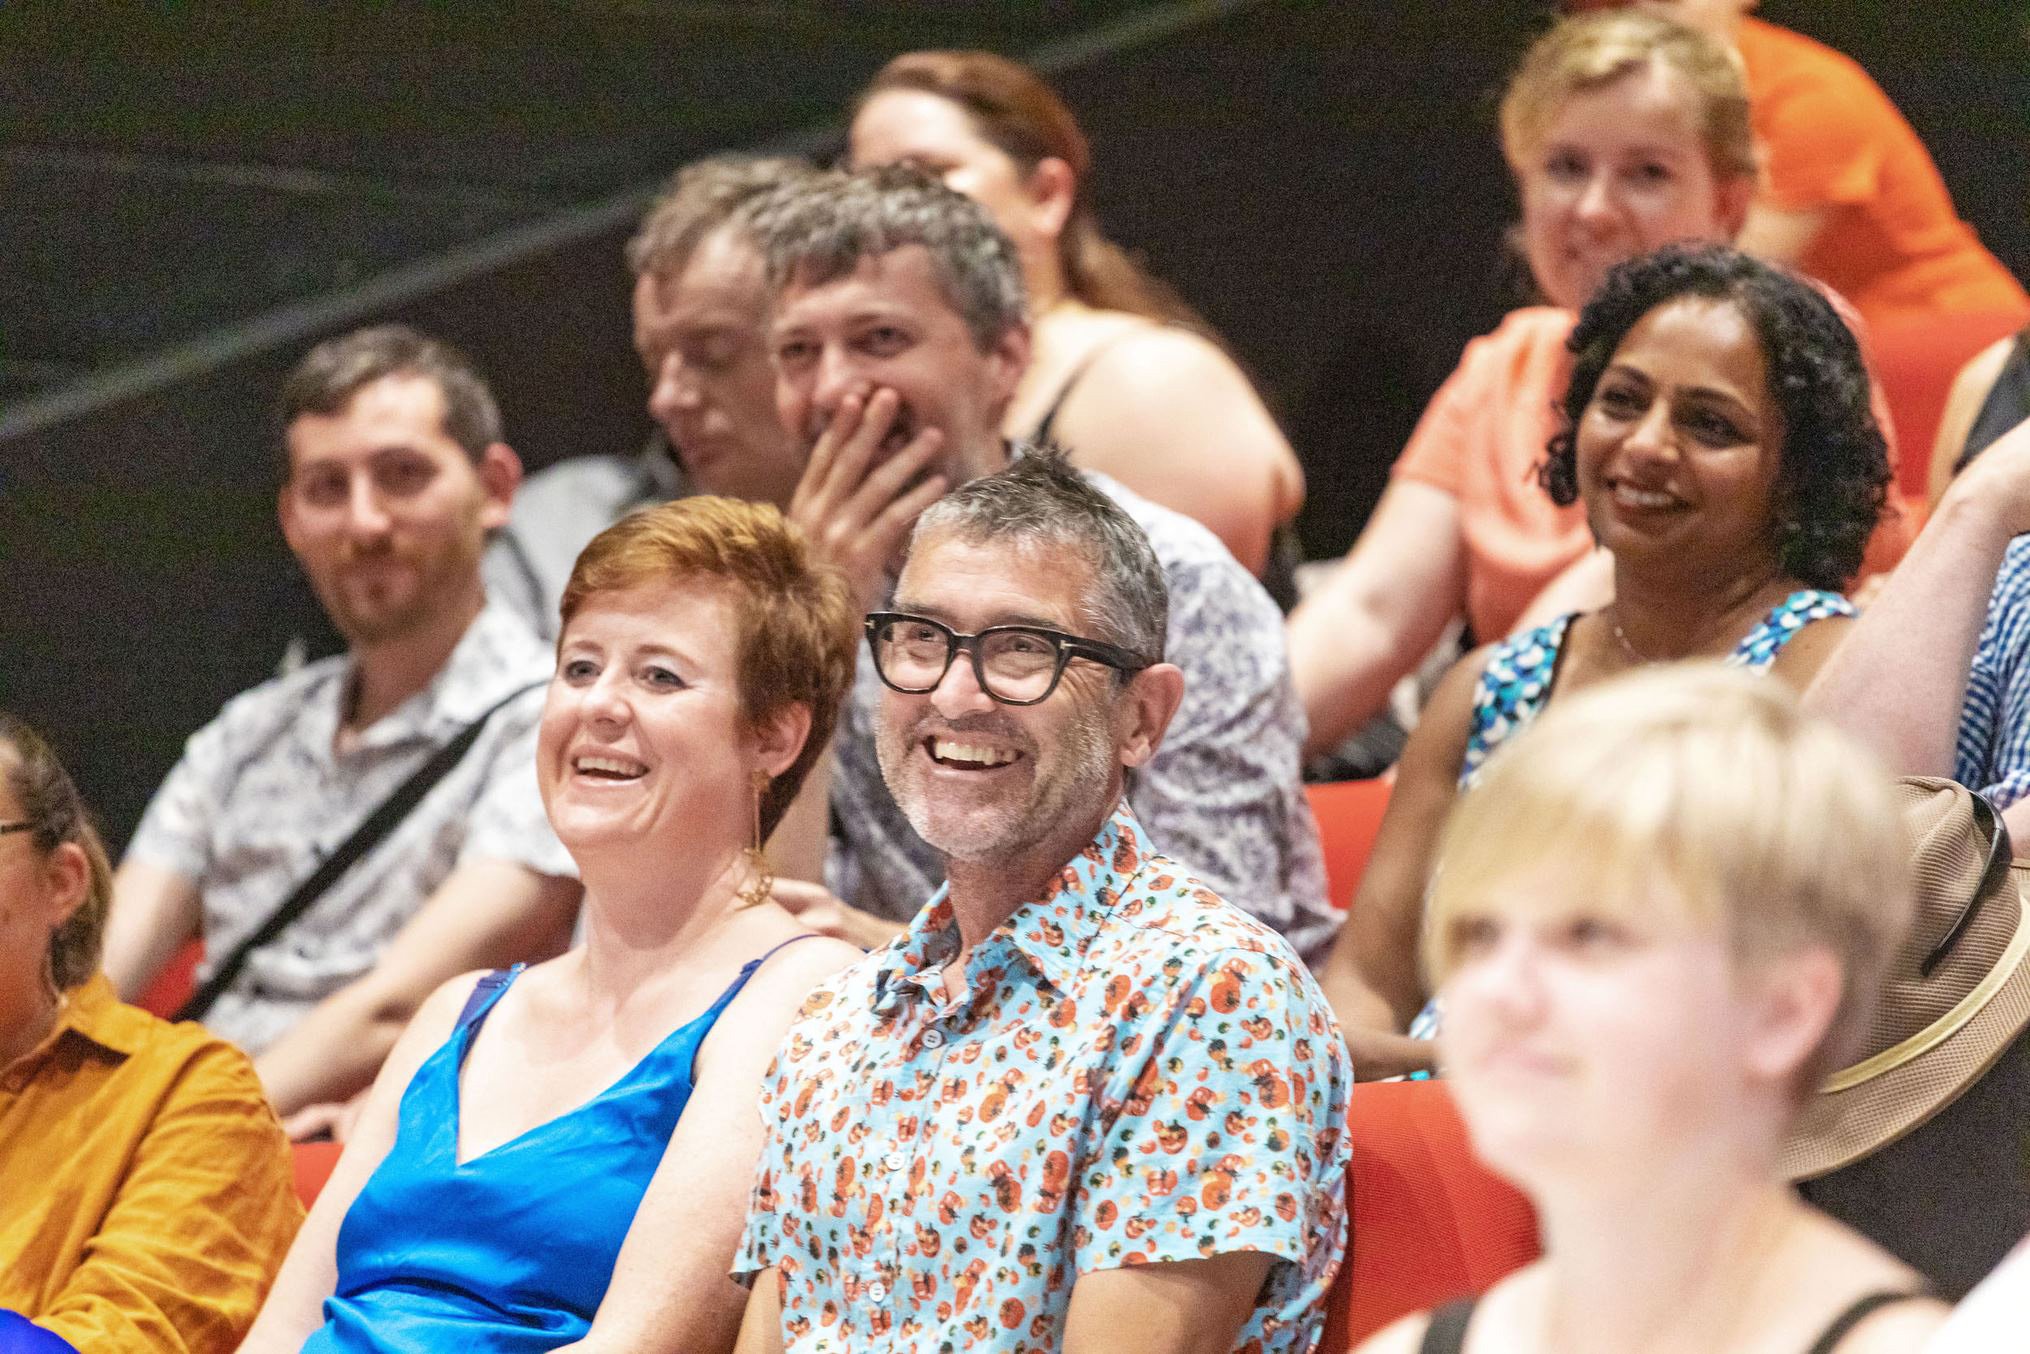 Covert-Theatre-Opening-Night-laughing-Audience.jpg